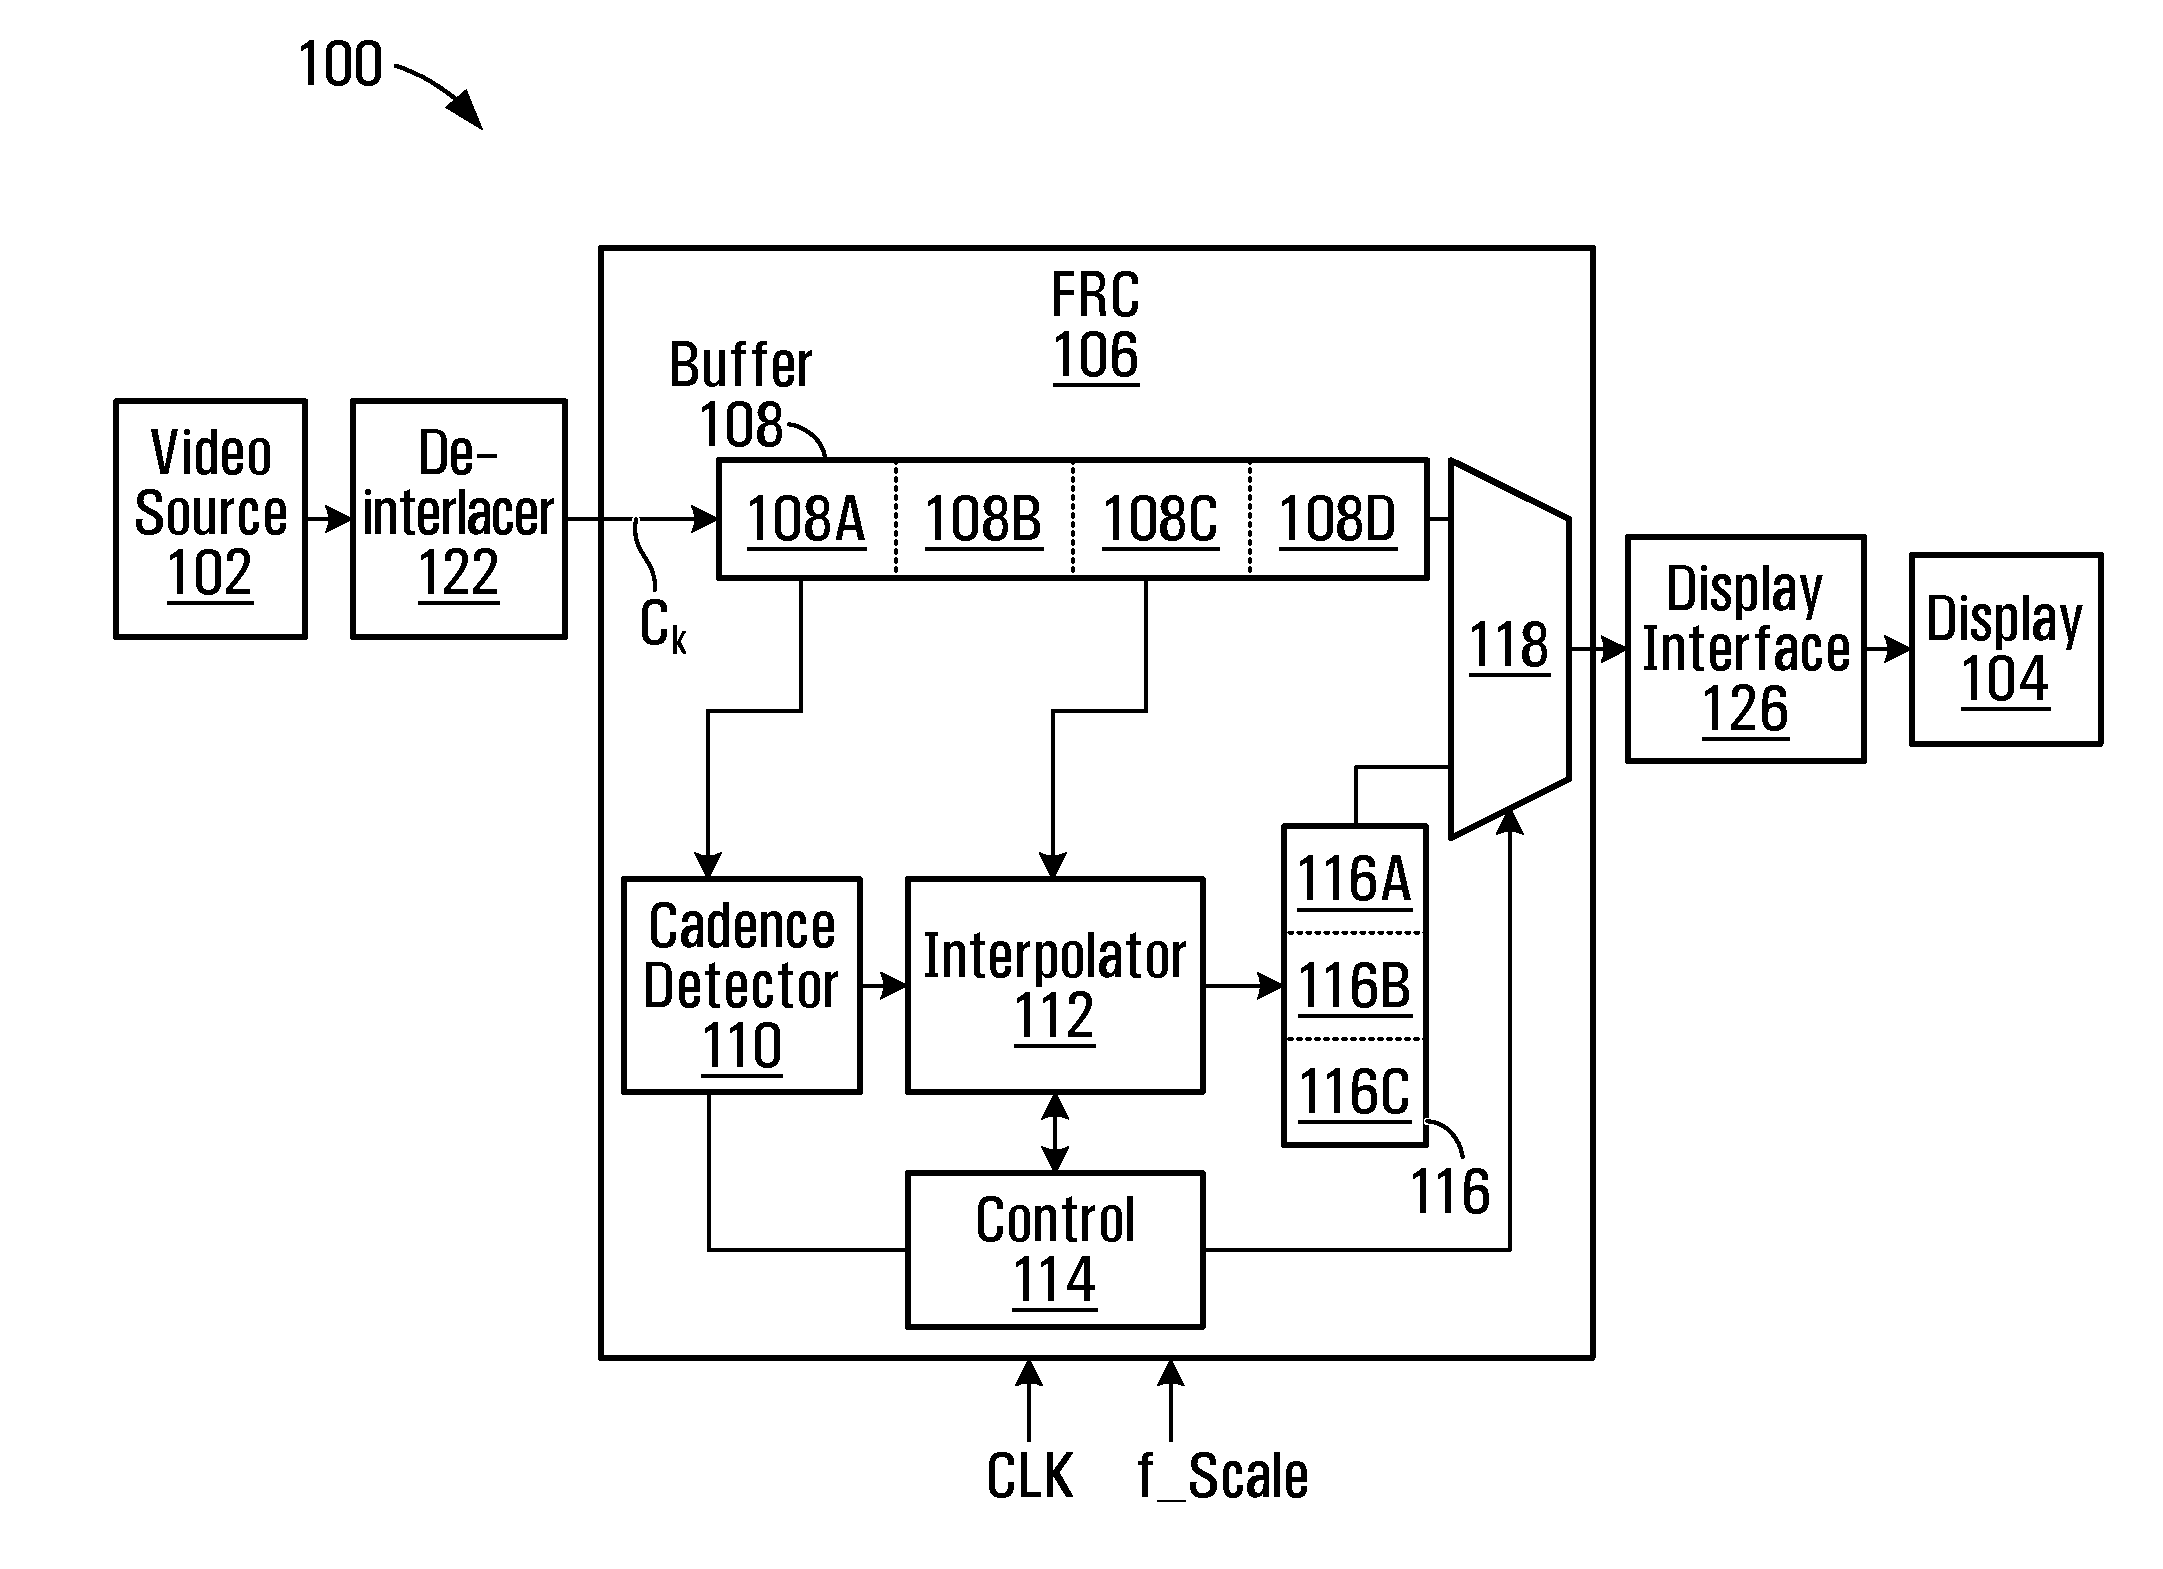 Frame rate converter for input frames with video and film content